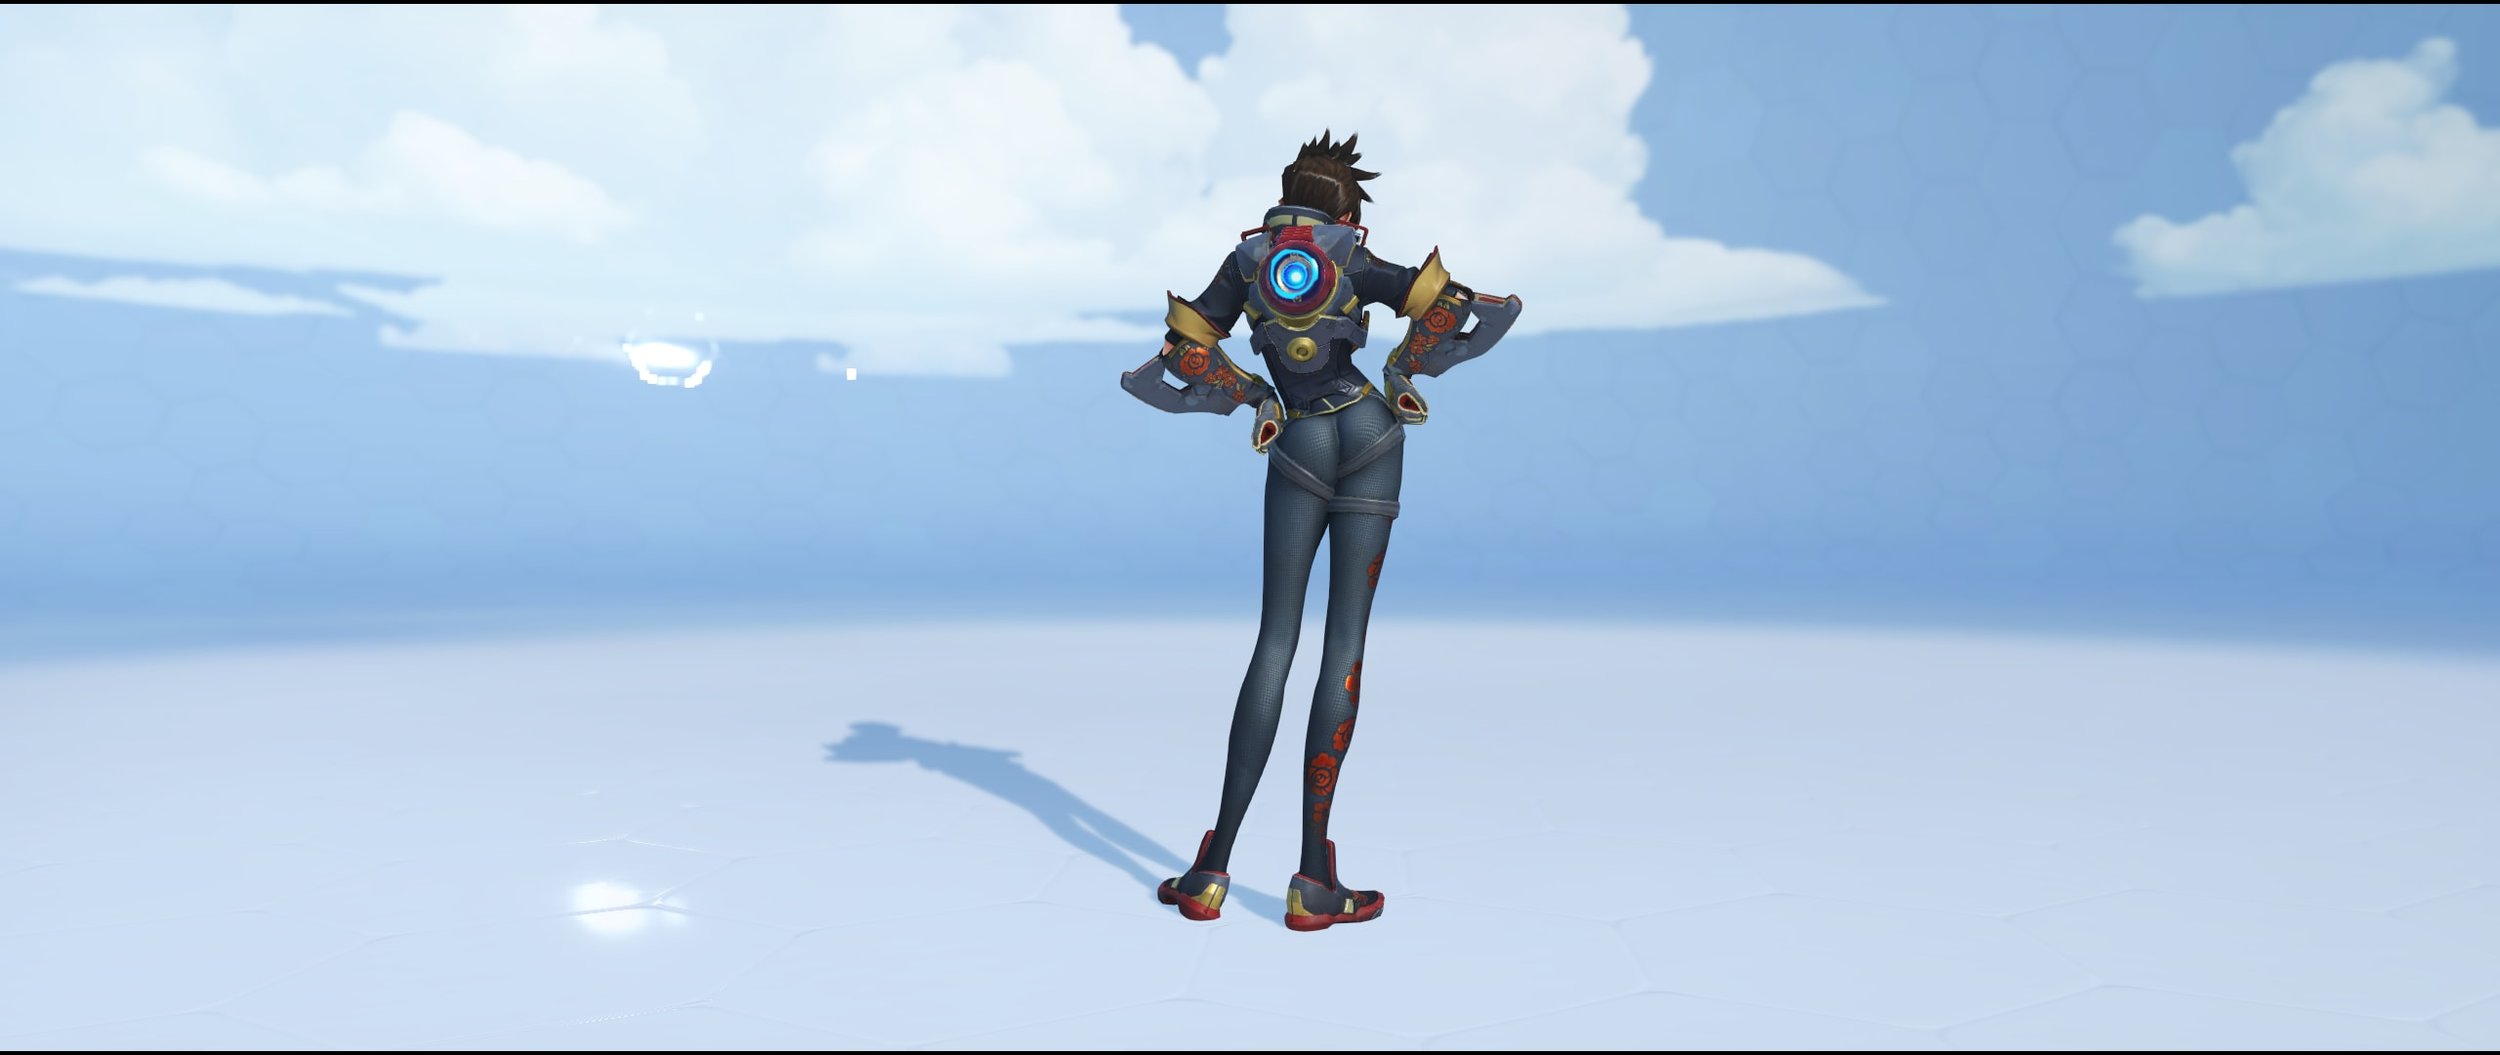 TRACER - Skins of Overwatch LEAGUE in 360 degrees (up to Overwatch